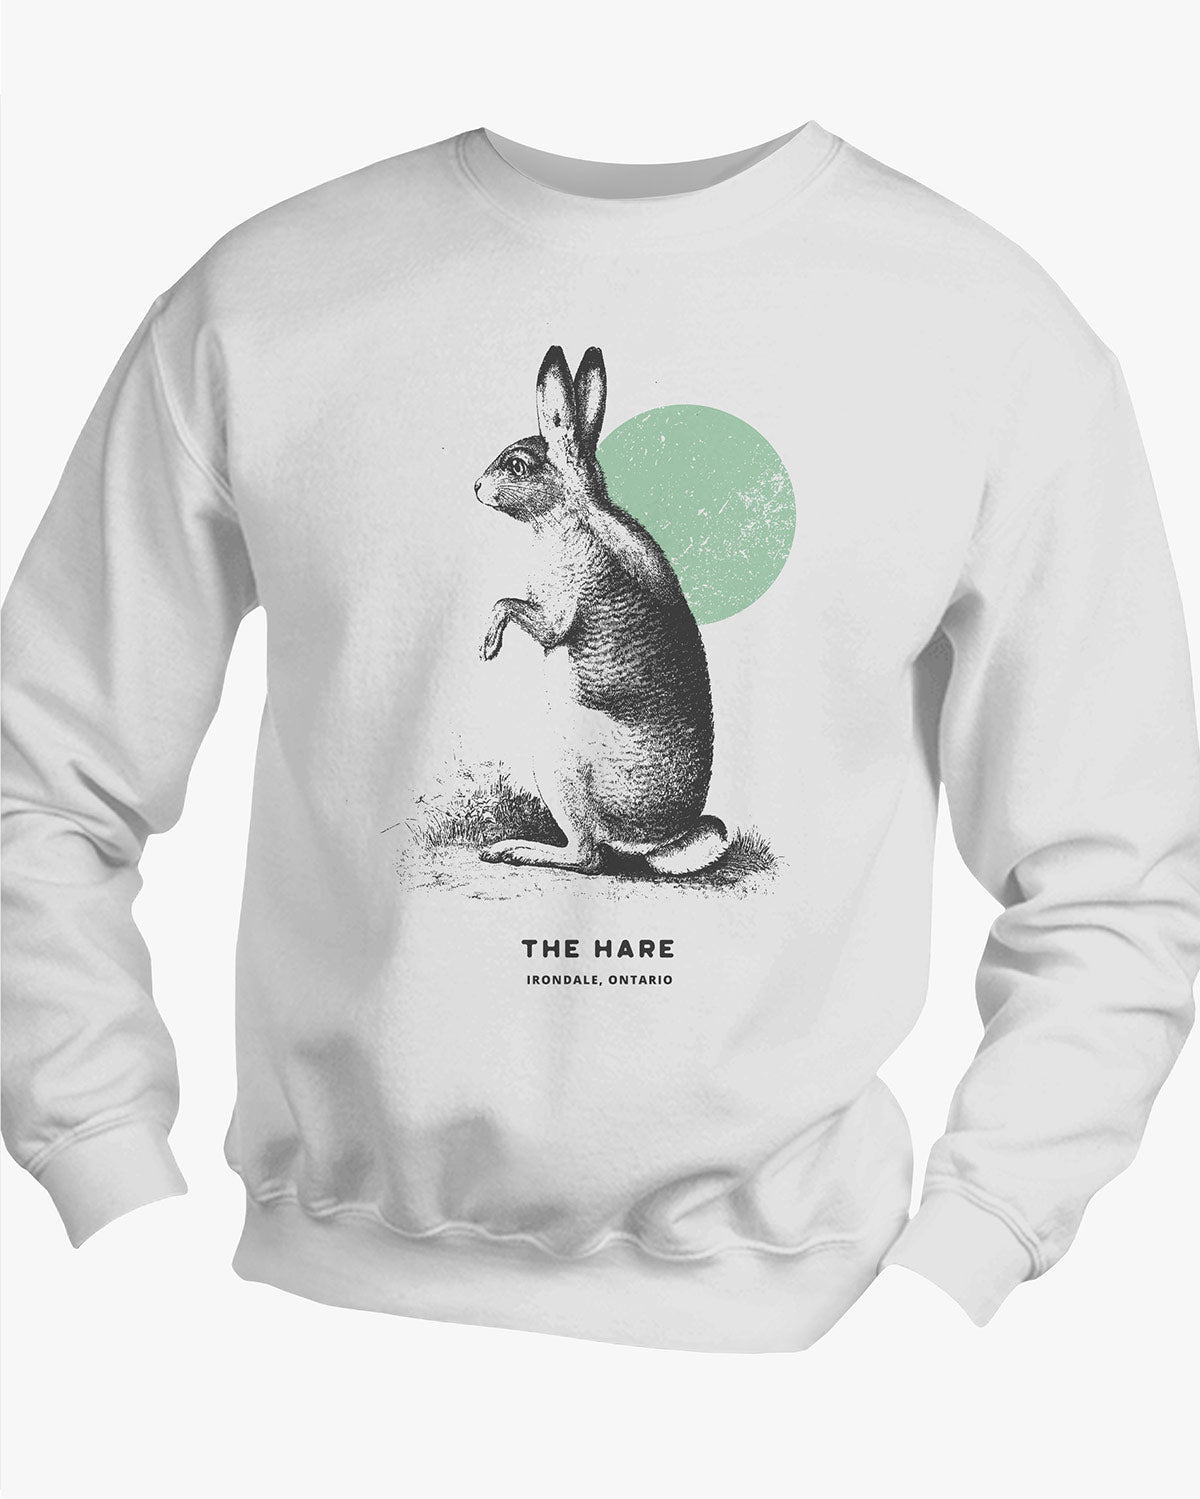 The Hare - Irondale - Sweater